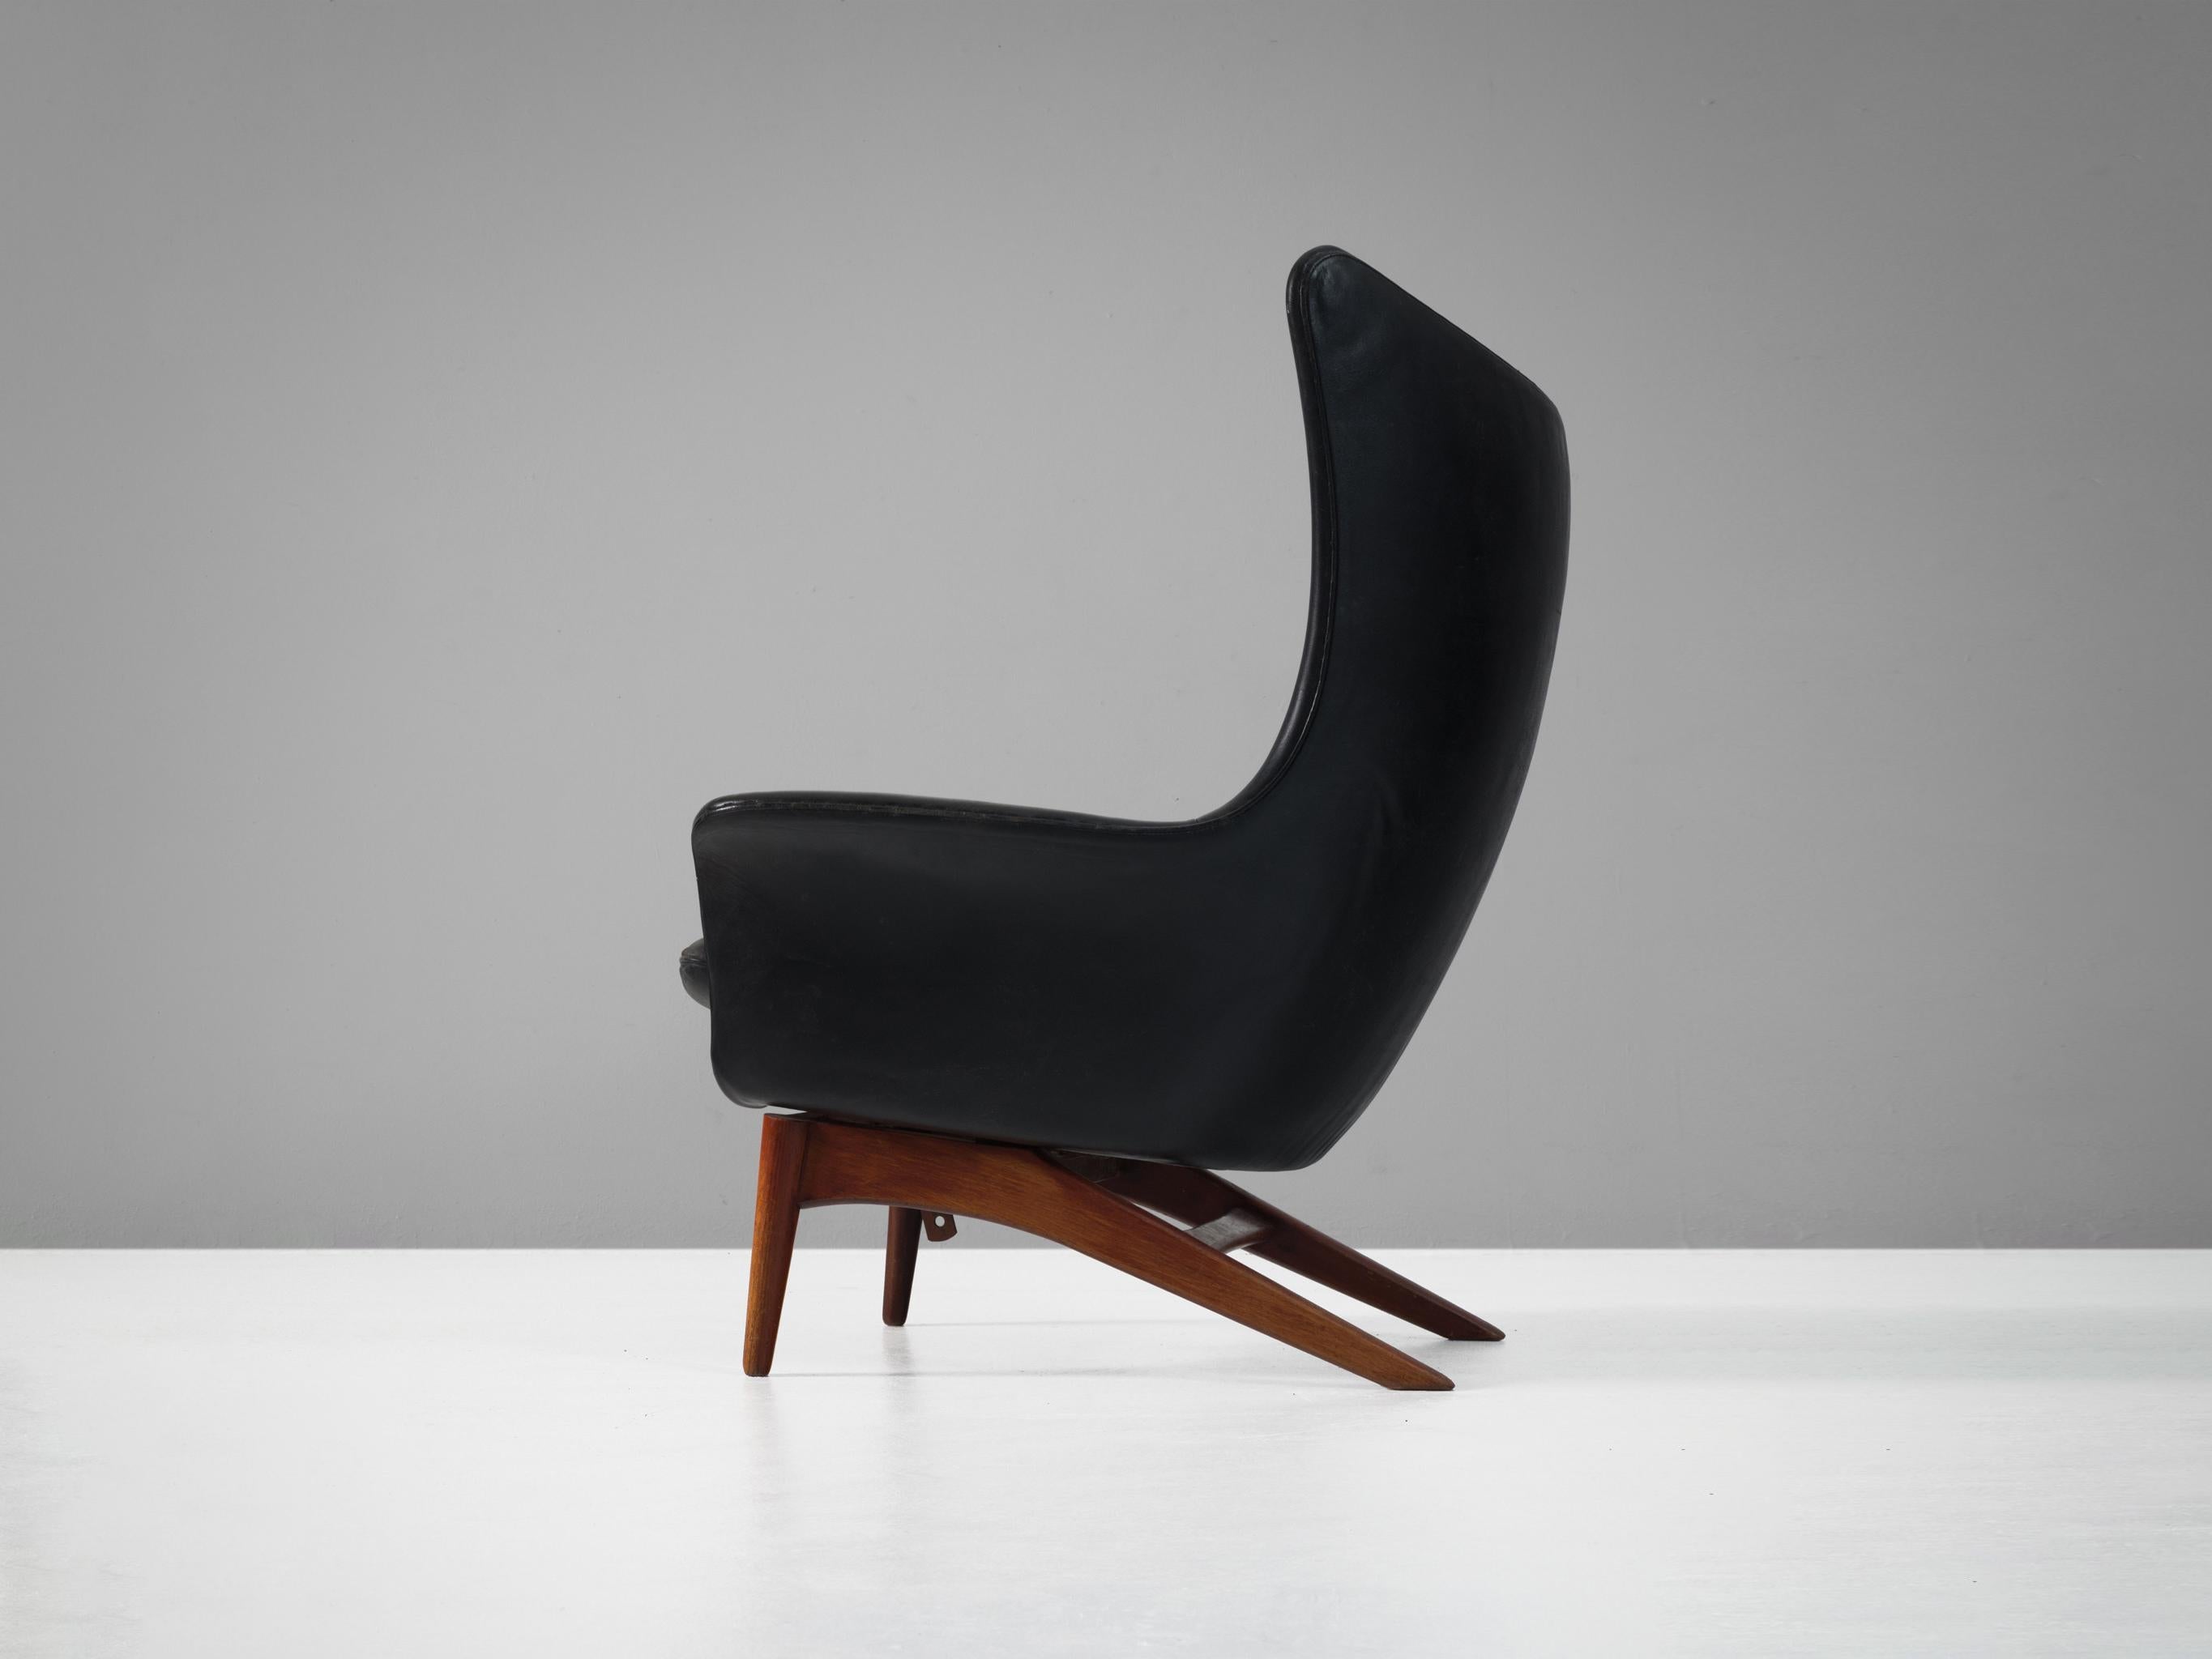 H.W. Klein Lounge Chair in Black Leather Upholstery